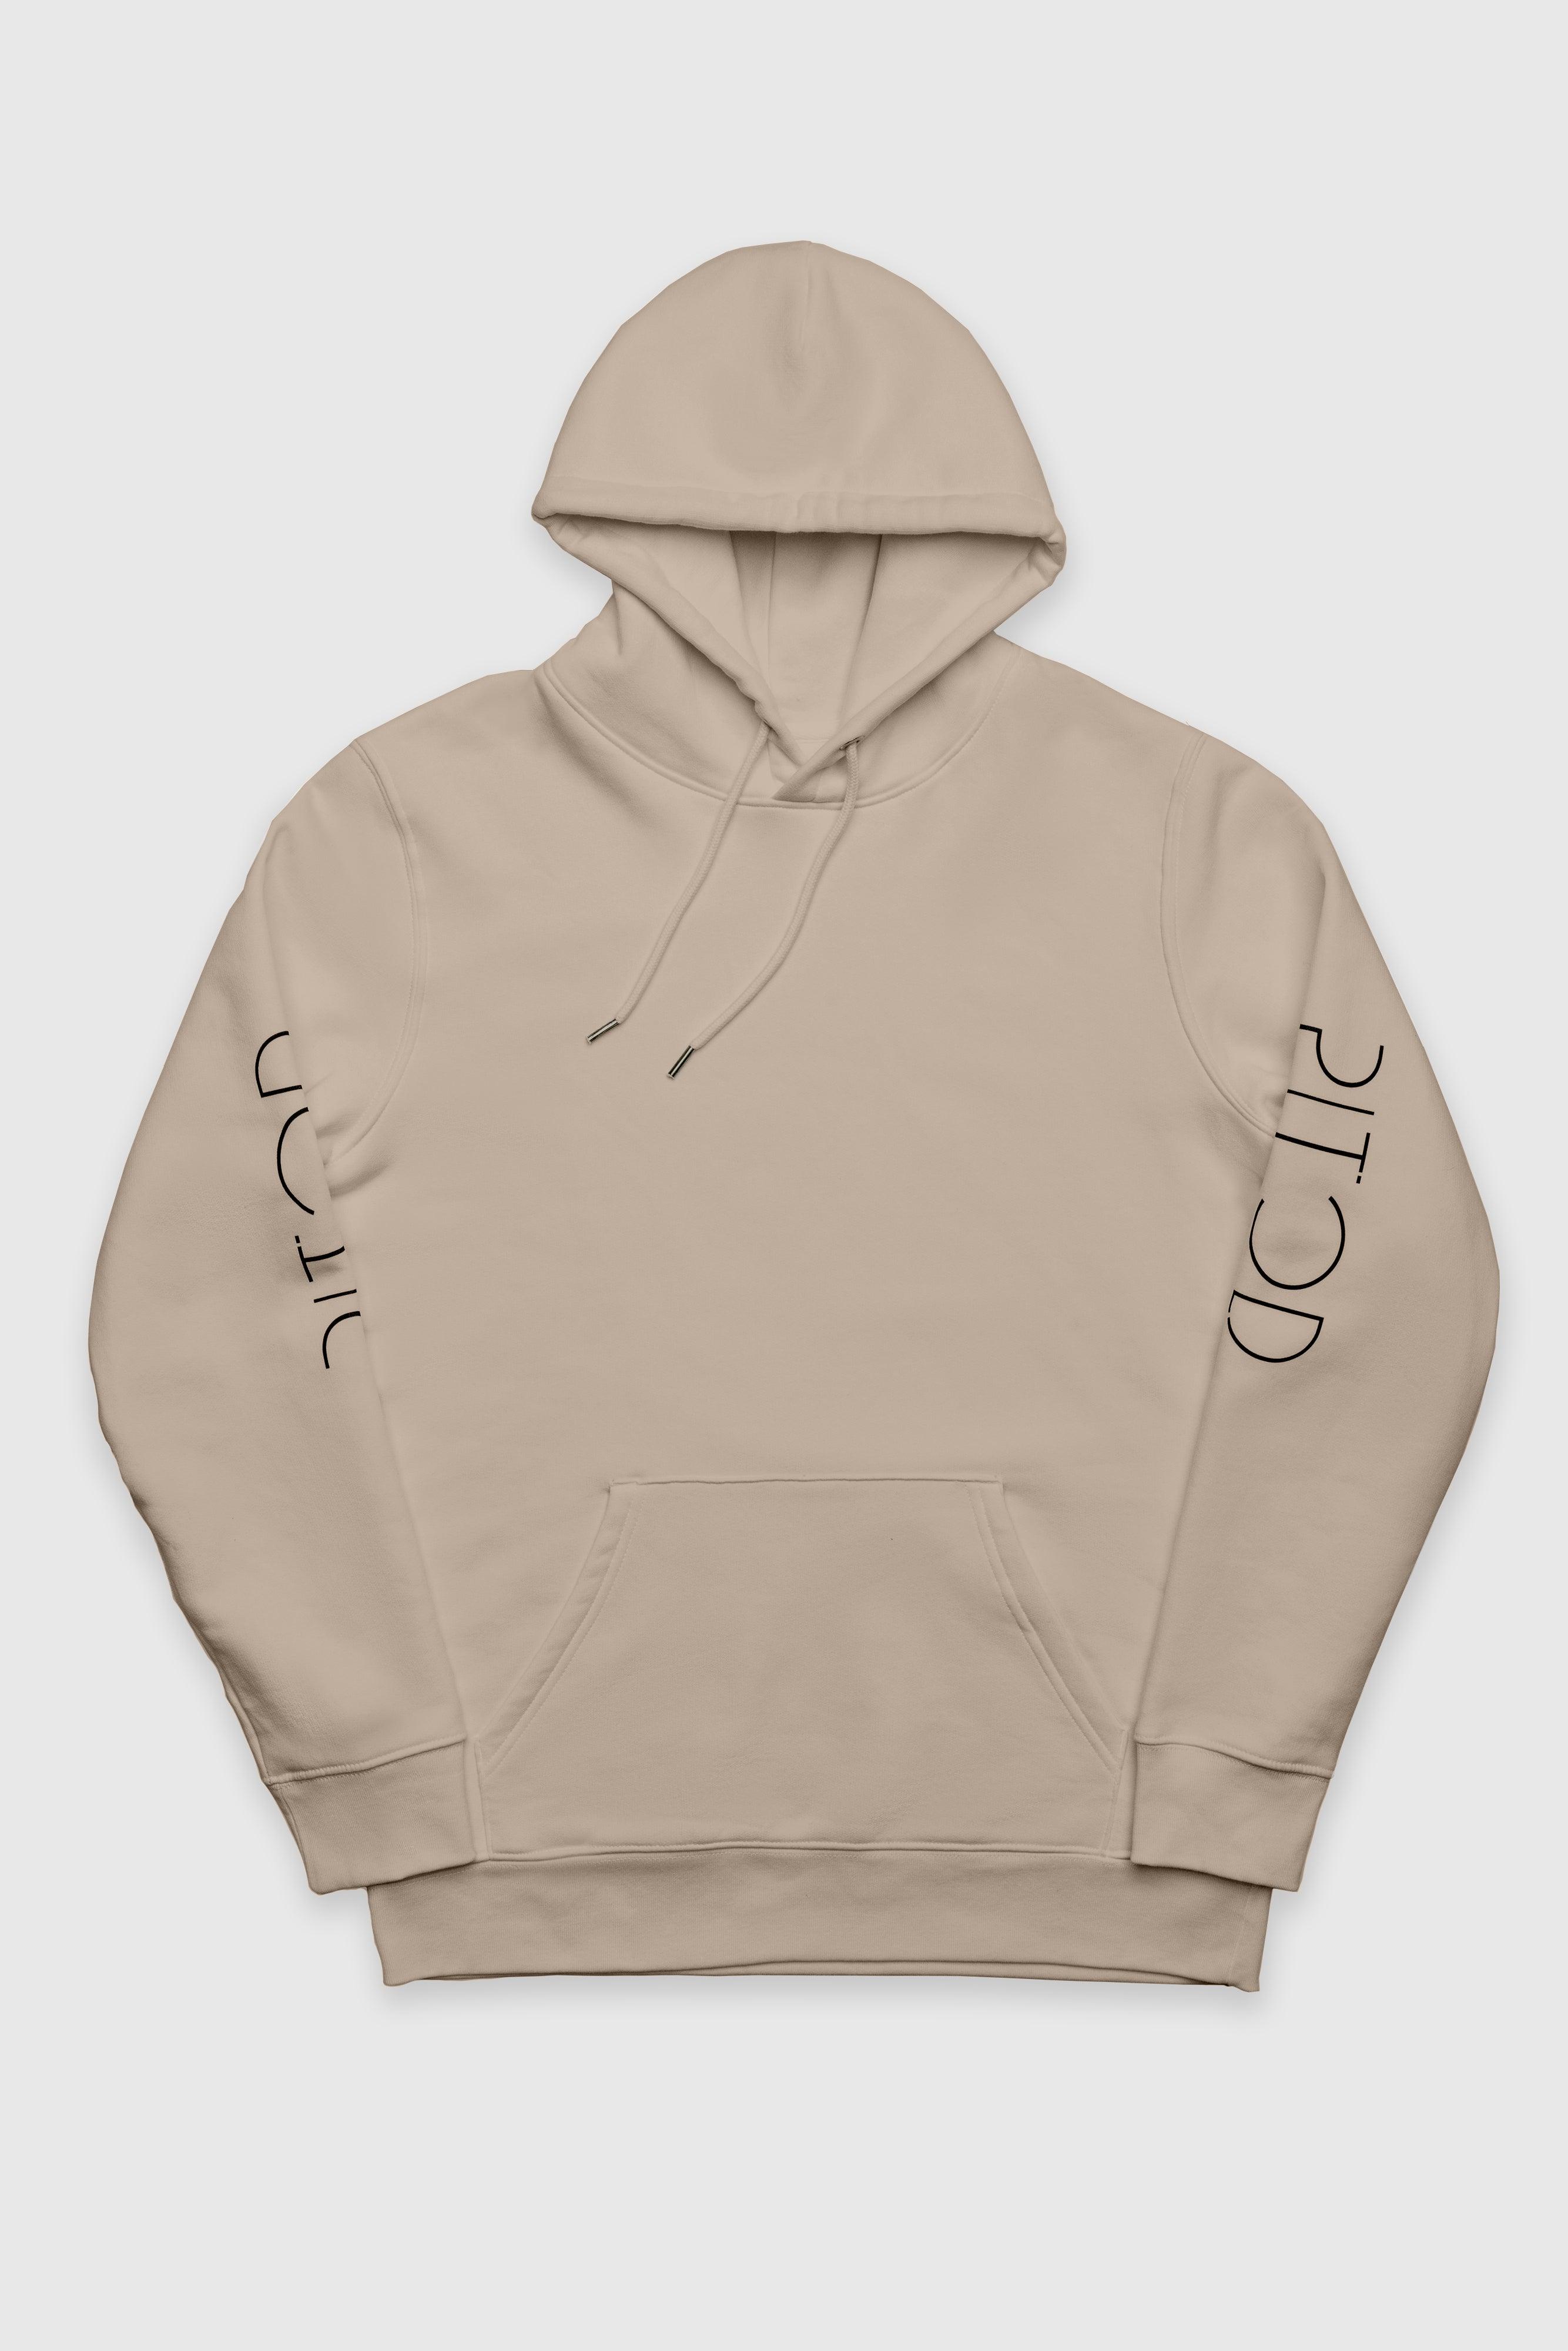 Product picture of Desert Dust Pitod Sleeve Hoodie